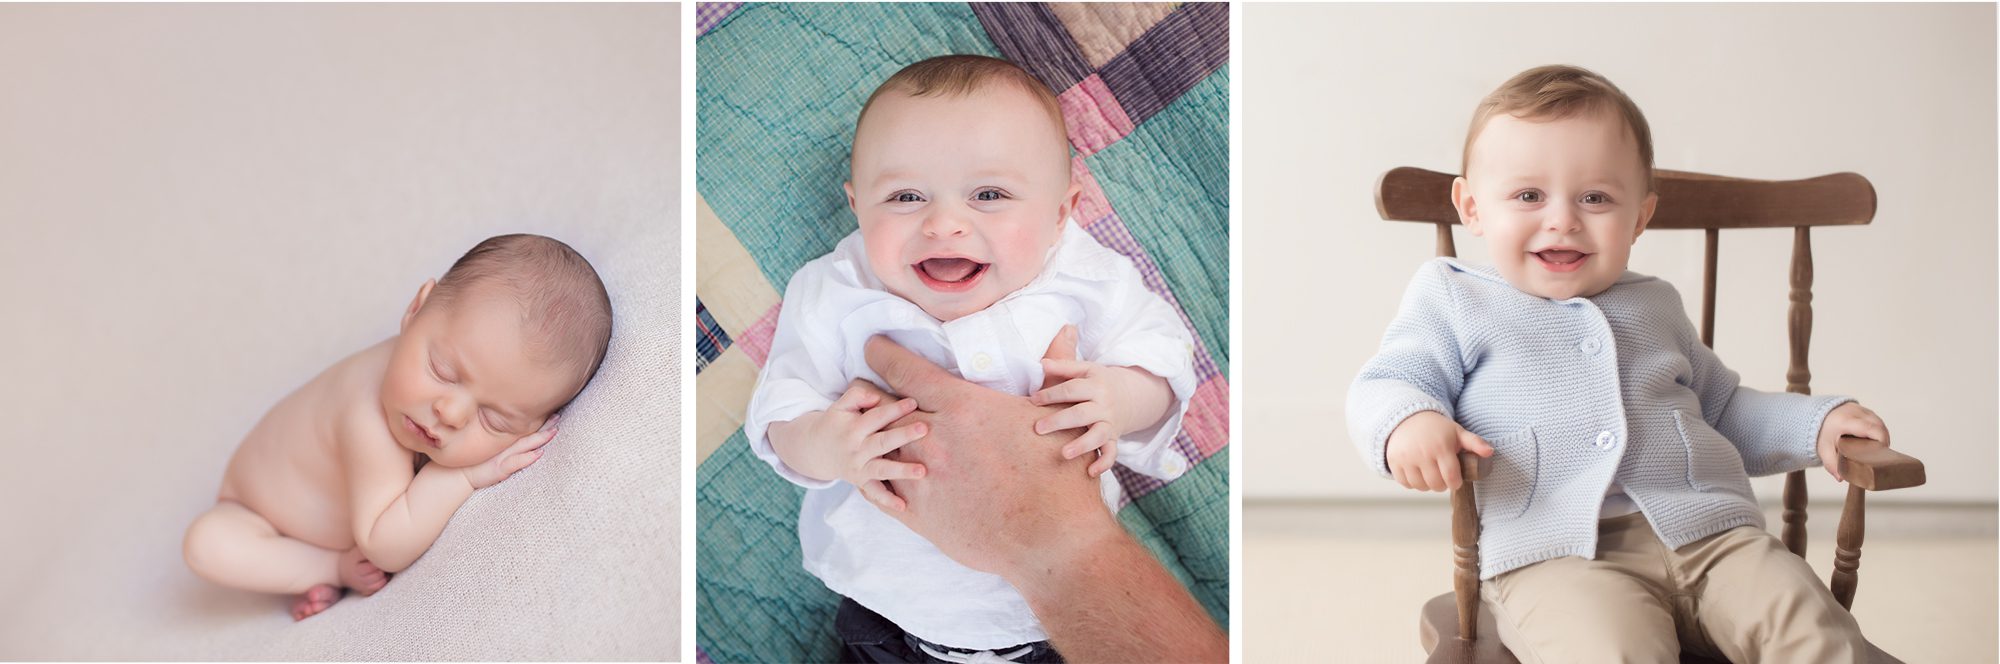 trio of images showing a newborn, five month, and one year picture of the same child